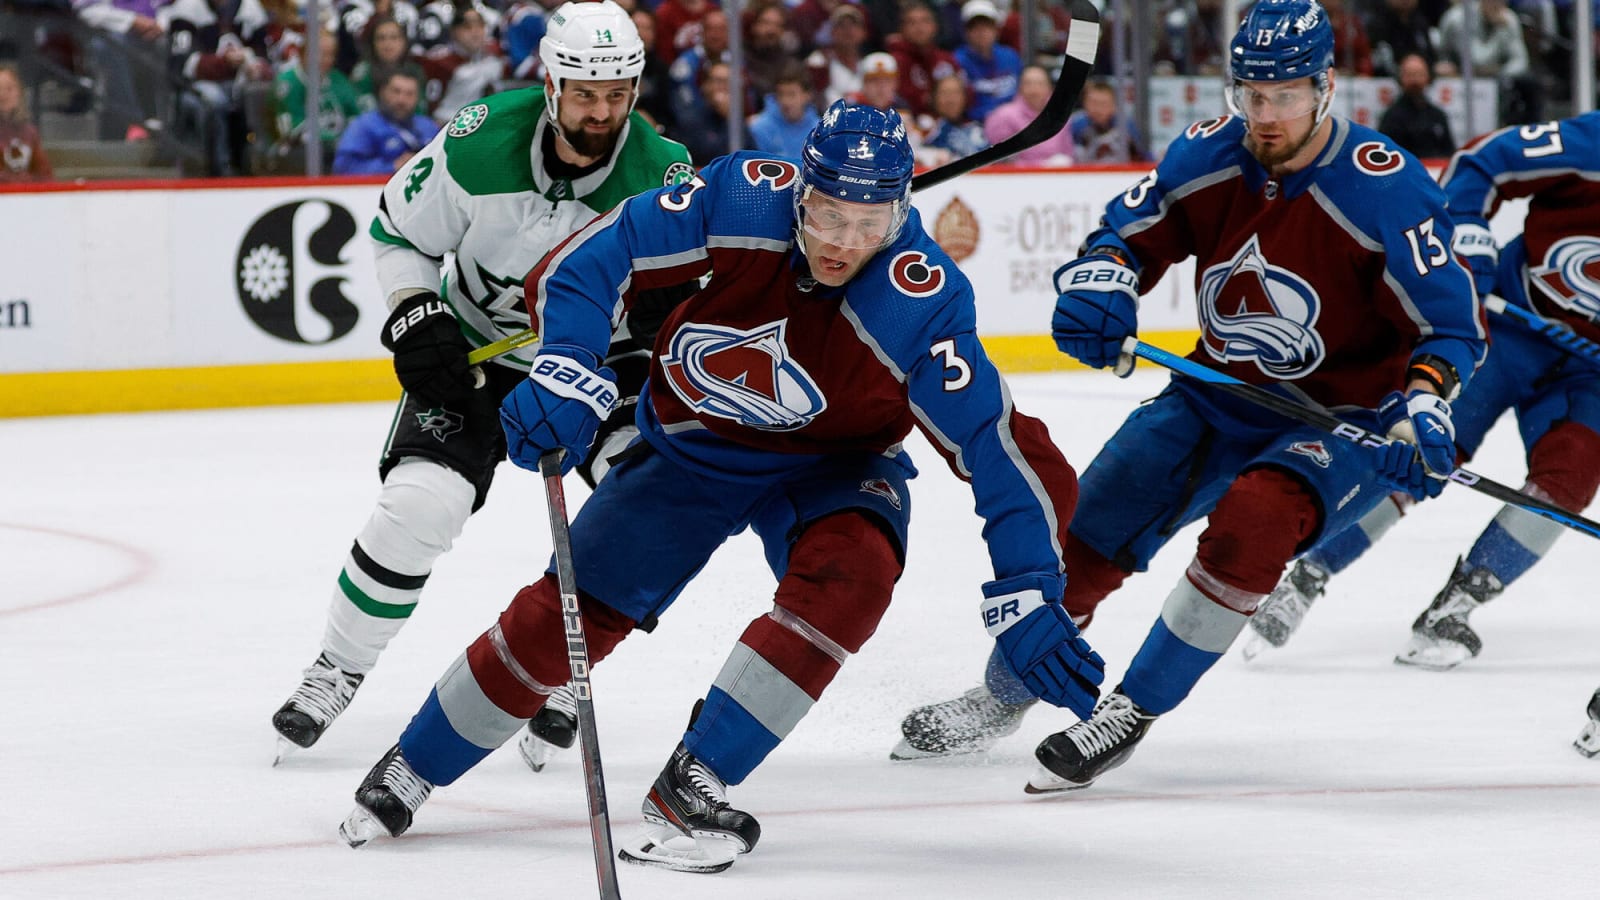 Avalanche’s Nichushkin Placed in Stage 3 of the Player Assistance Program